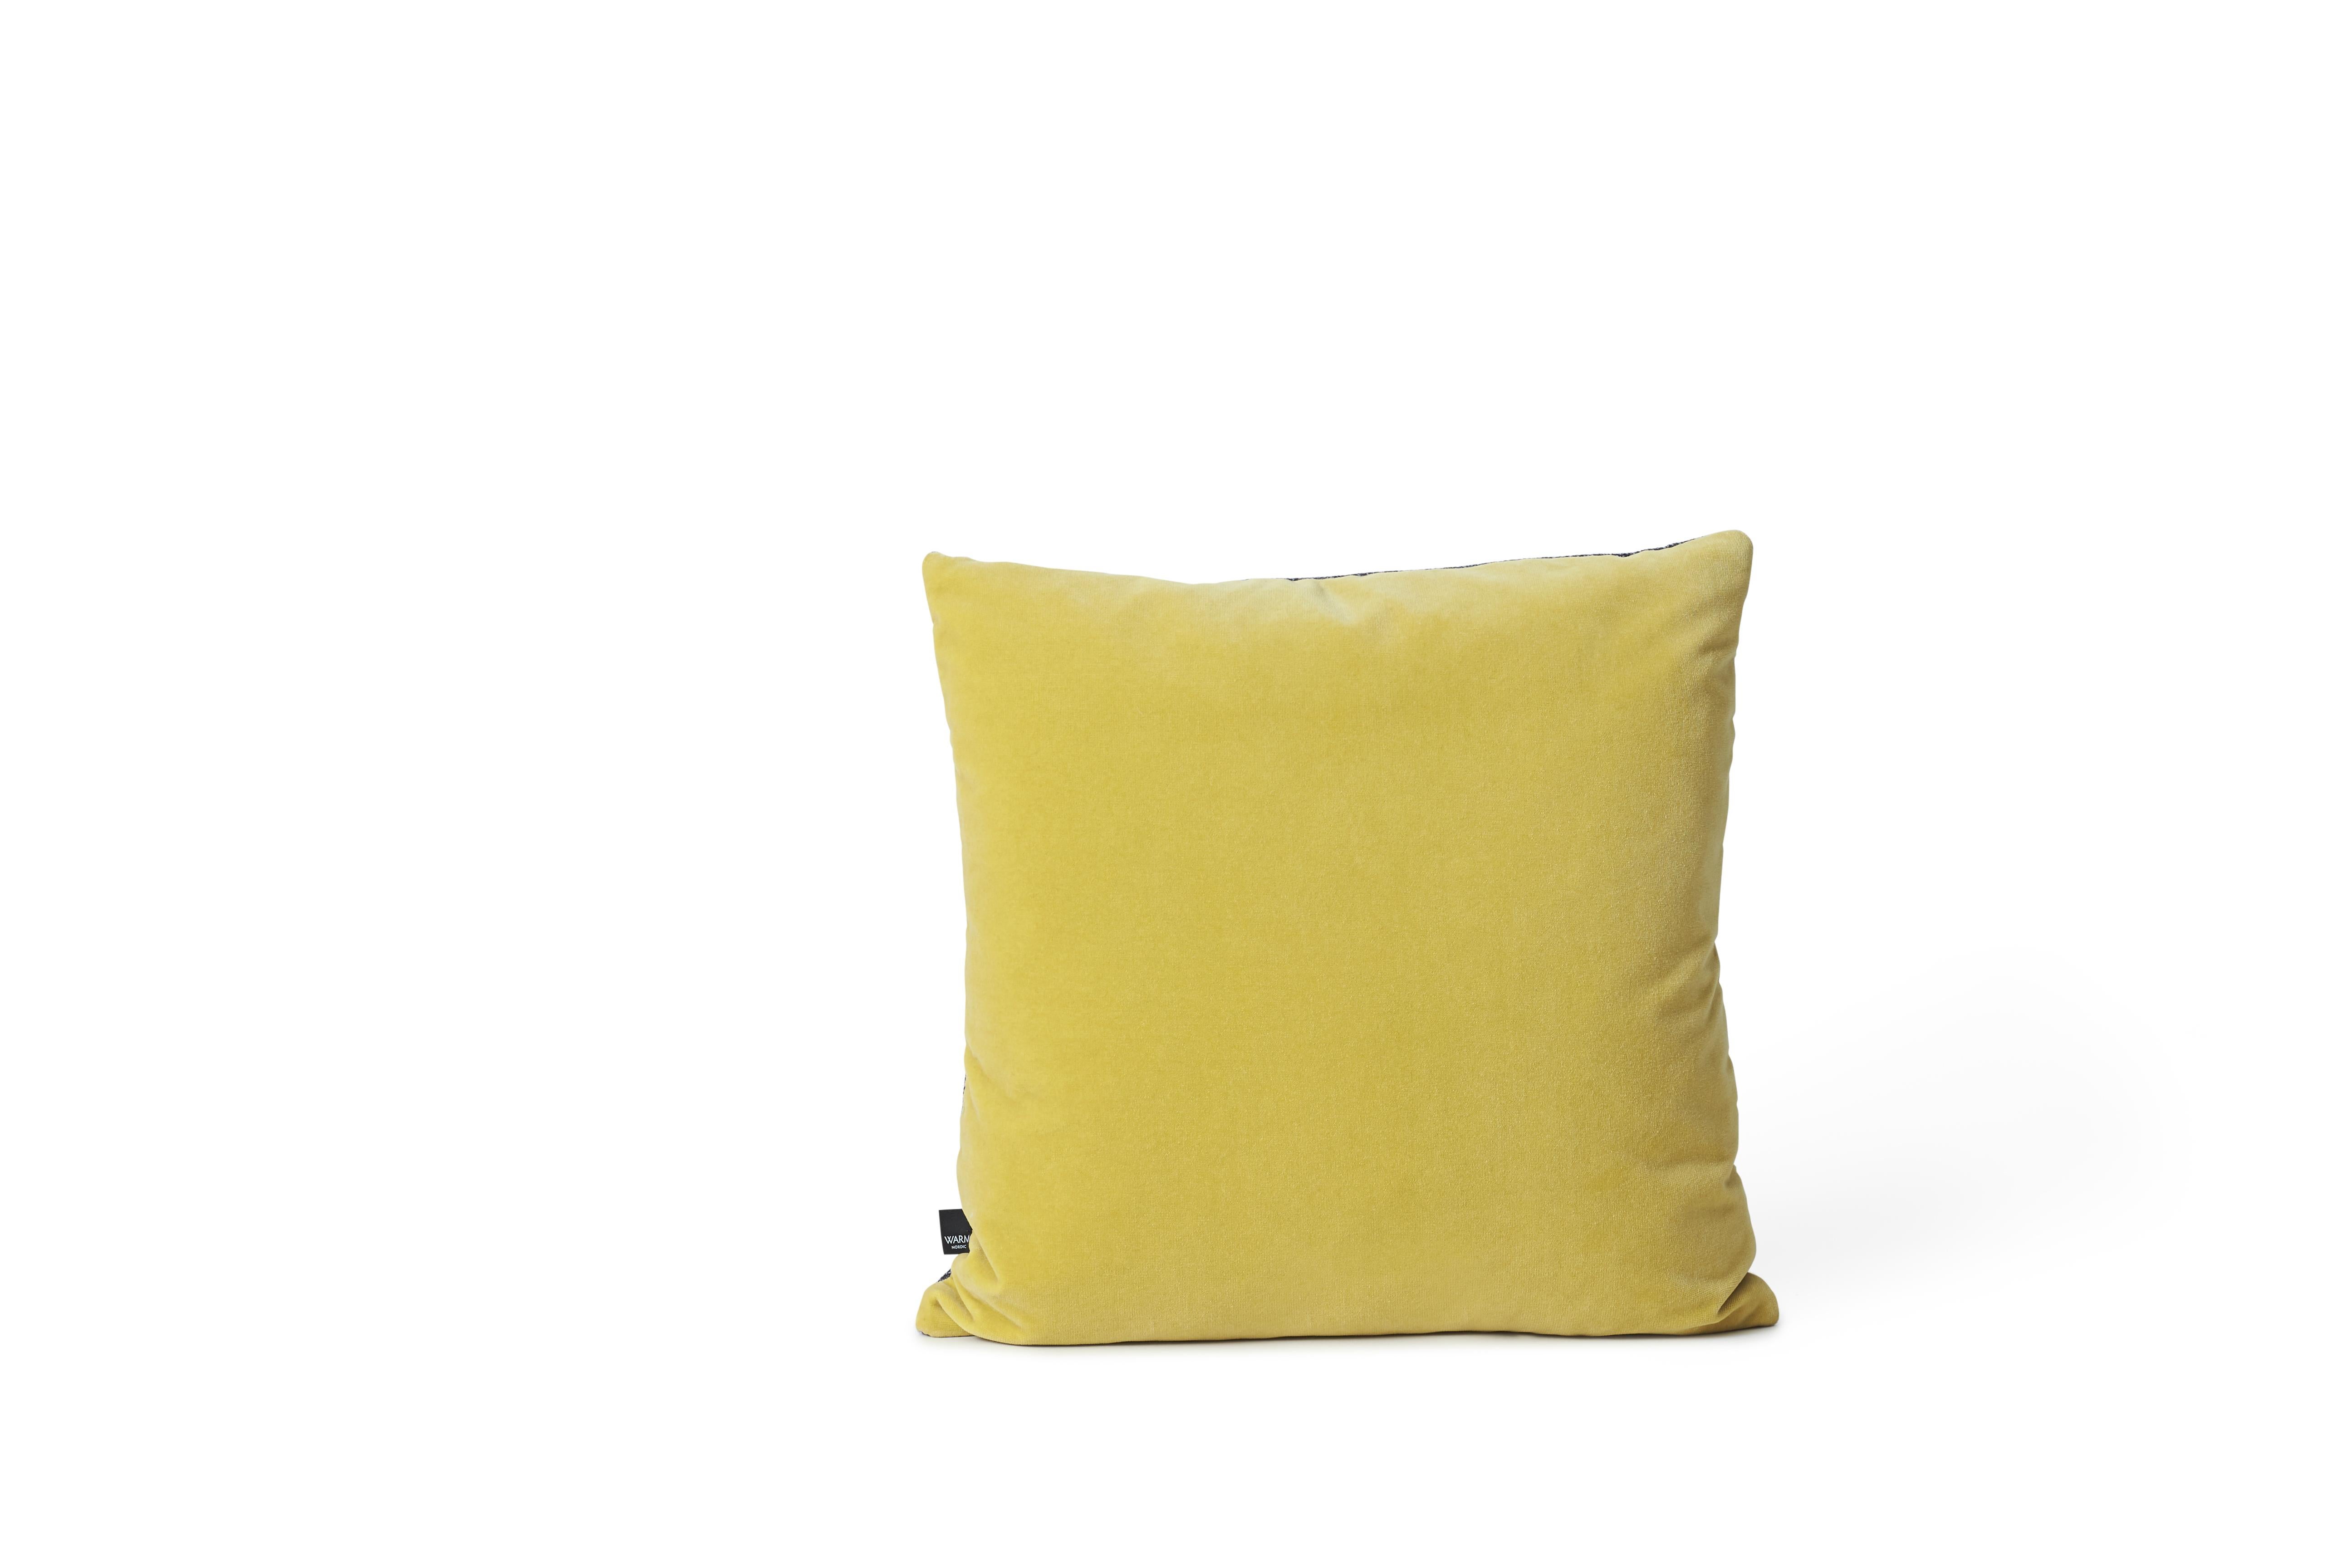 For Sale: Multi (Blue) Moodify Square Cushion, by Warm Nordic 2